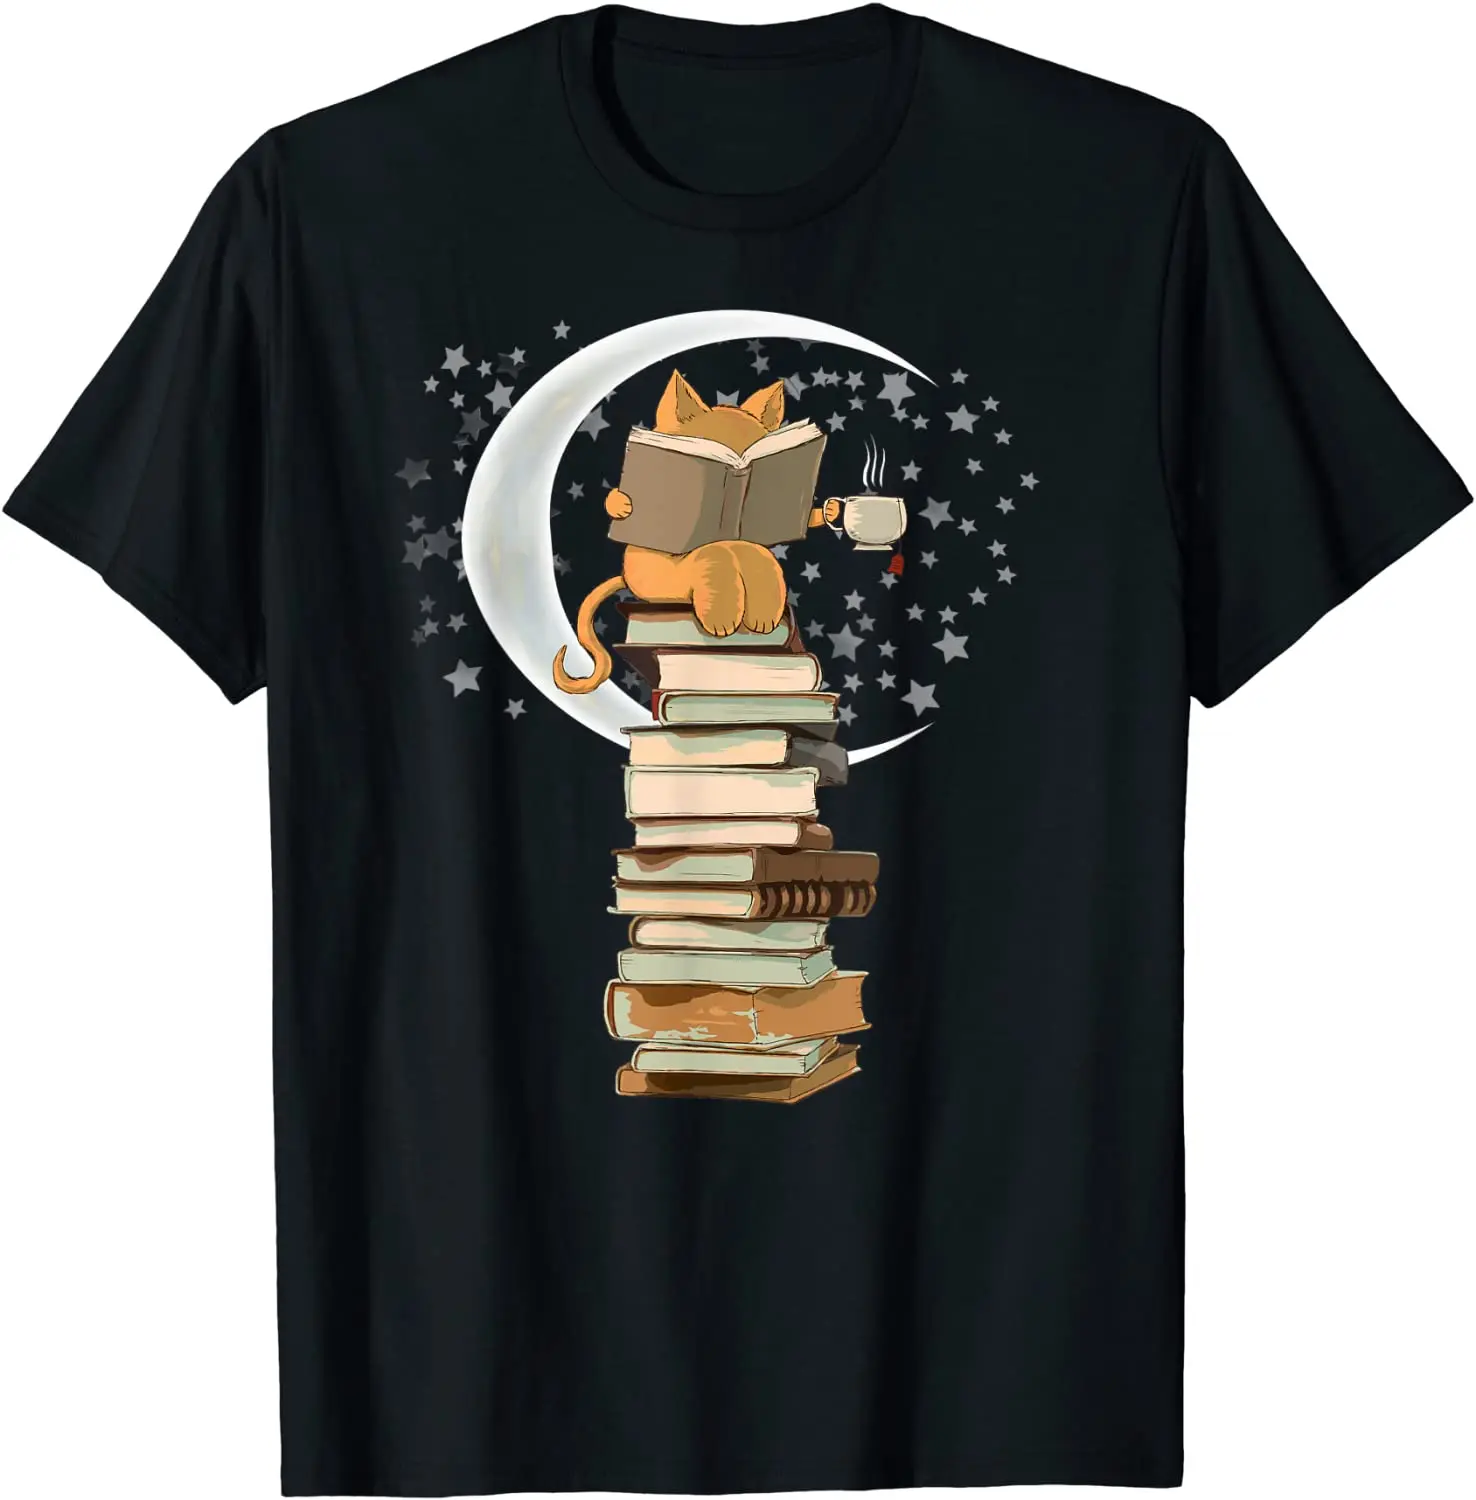 

Kittens, Cats, Tea and Books Gift Reading by Moonlight T-Shirt 3D Printed Cotton Men T Shirt Casual High Quality T Shirt